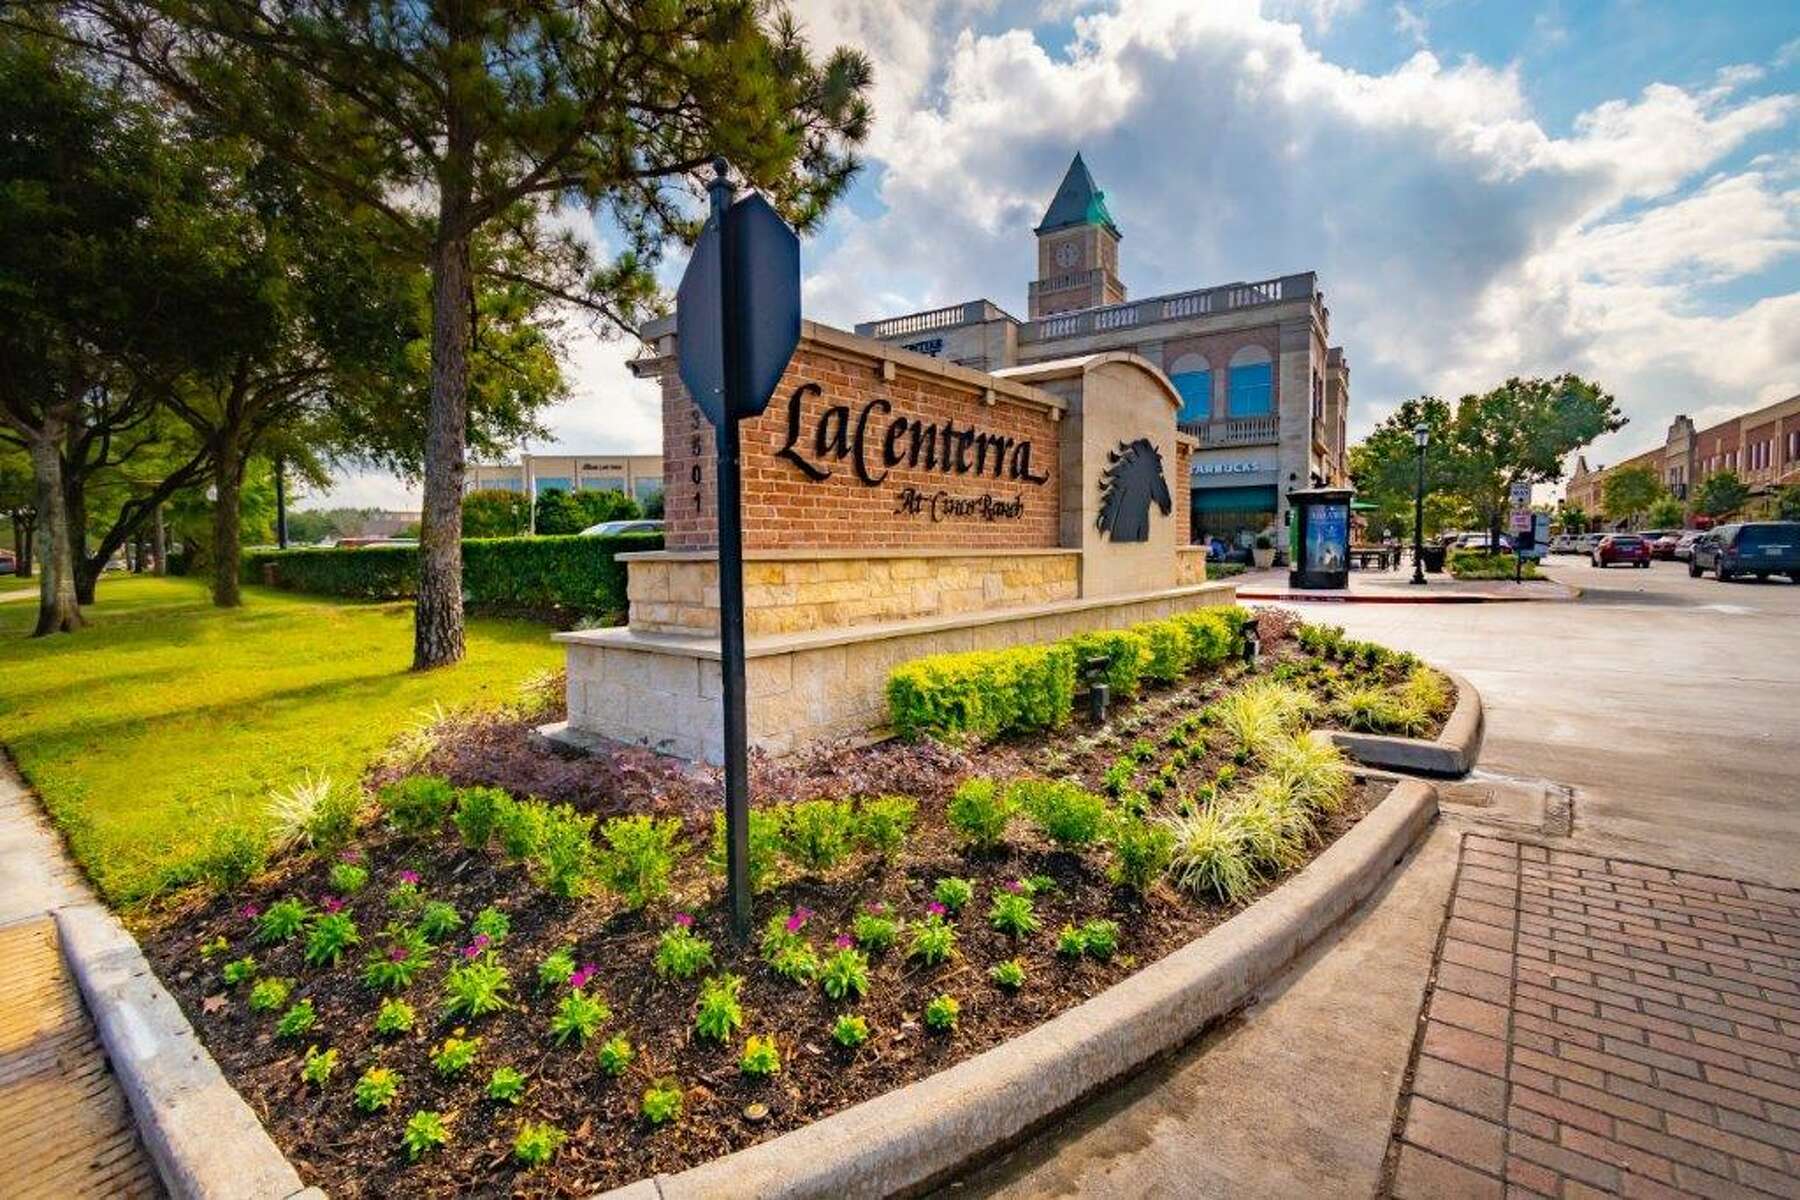 5 retailers to open in Katy's LaCenterra at Cinco Ranch